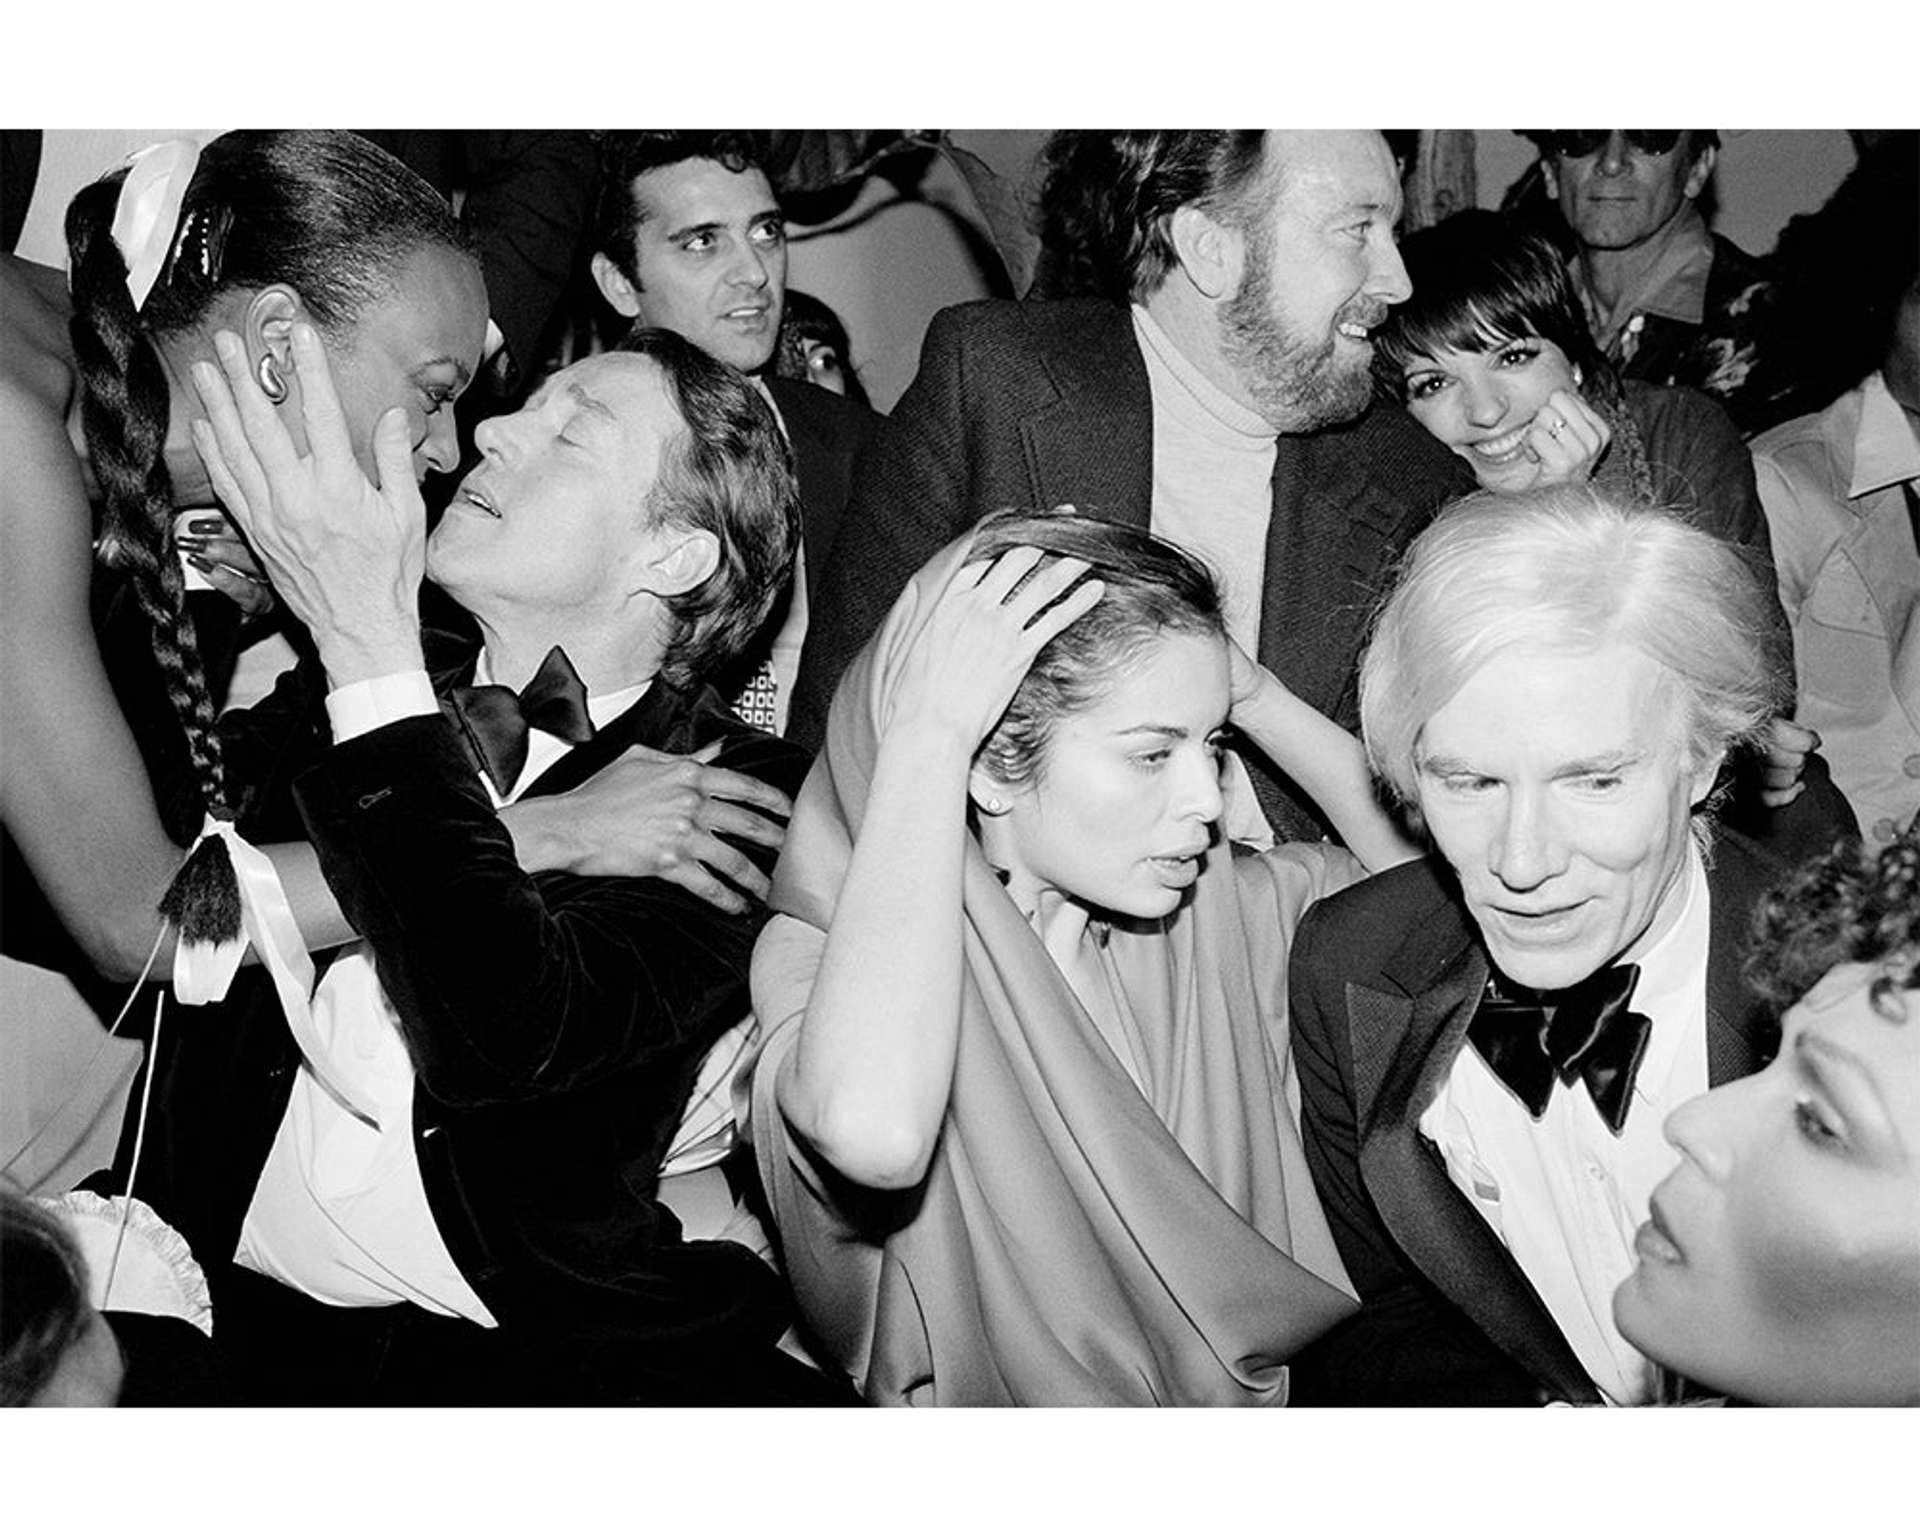 New Years Eve at Studio 54, 1977 by Robin Platzer